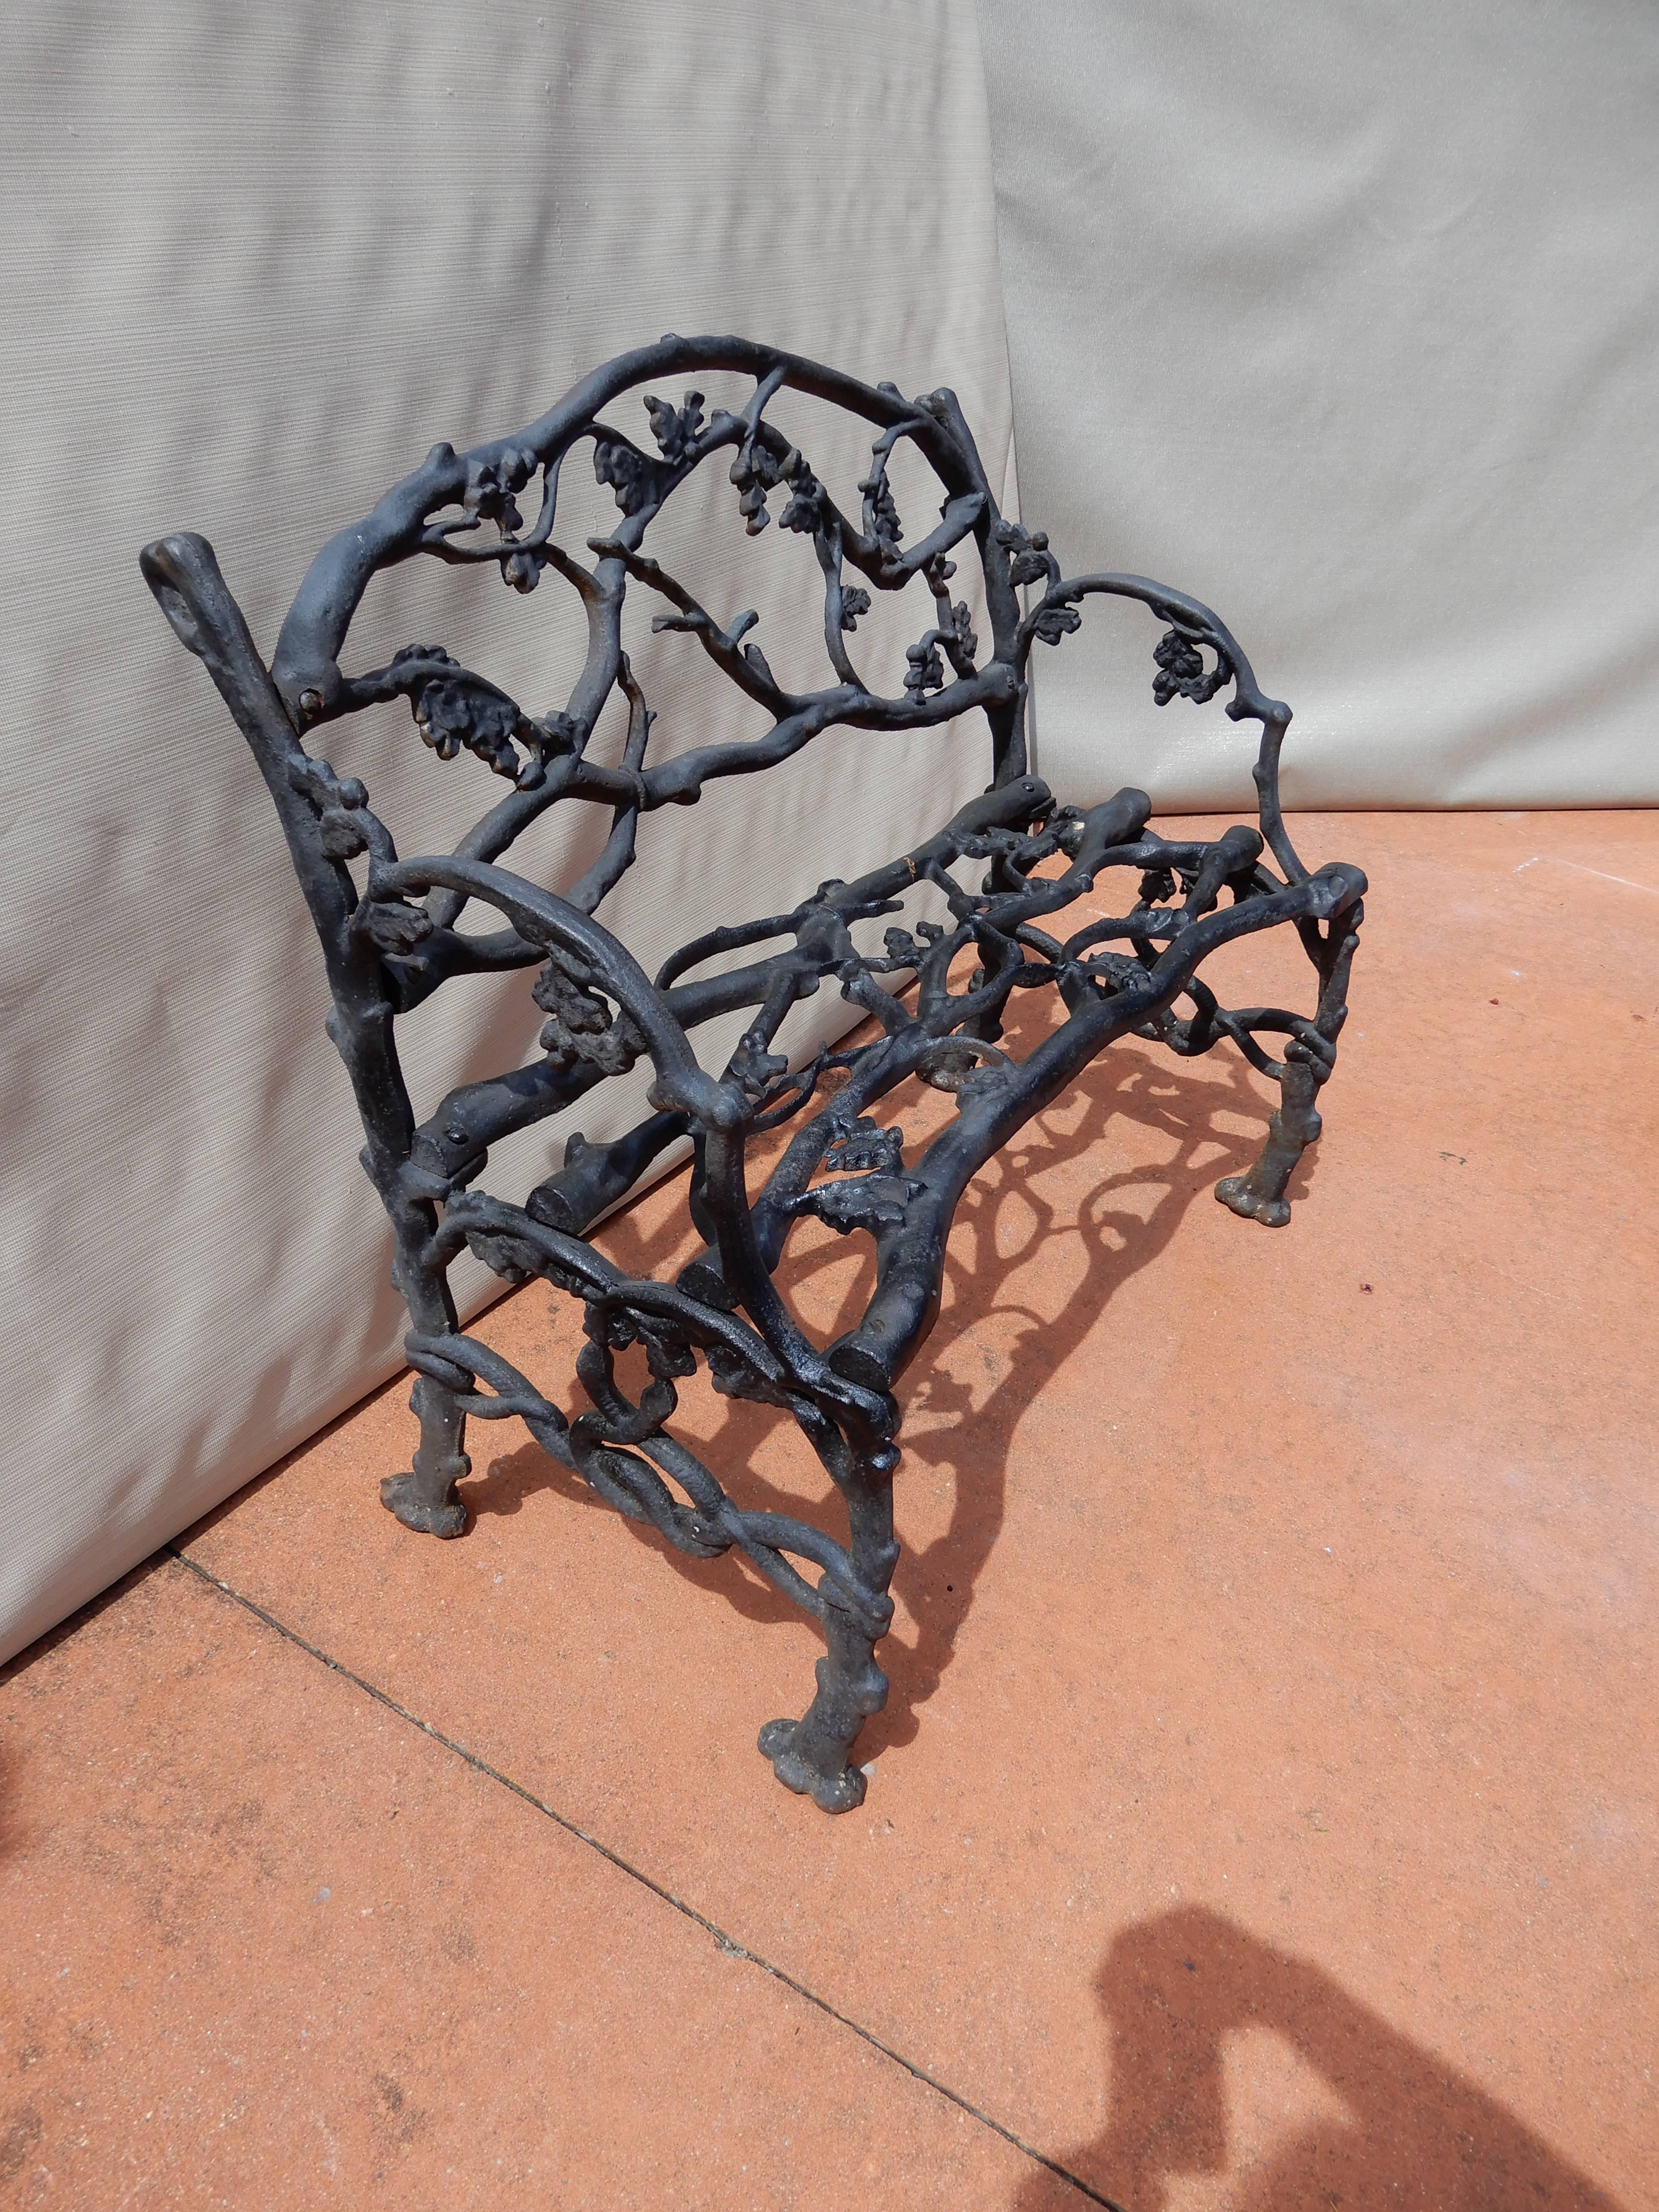 Cast iron garden bench in the naturalistic twig or Rustic pattern. Usually these Benches appear in the longer size but this bench is only 33 inches long. The bench is adorned with details of oak leaves, acorns and snakes on the arms. The Rustic or